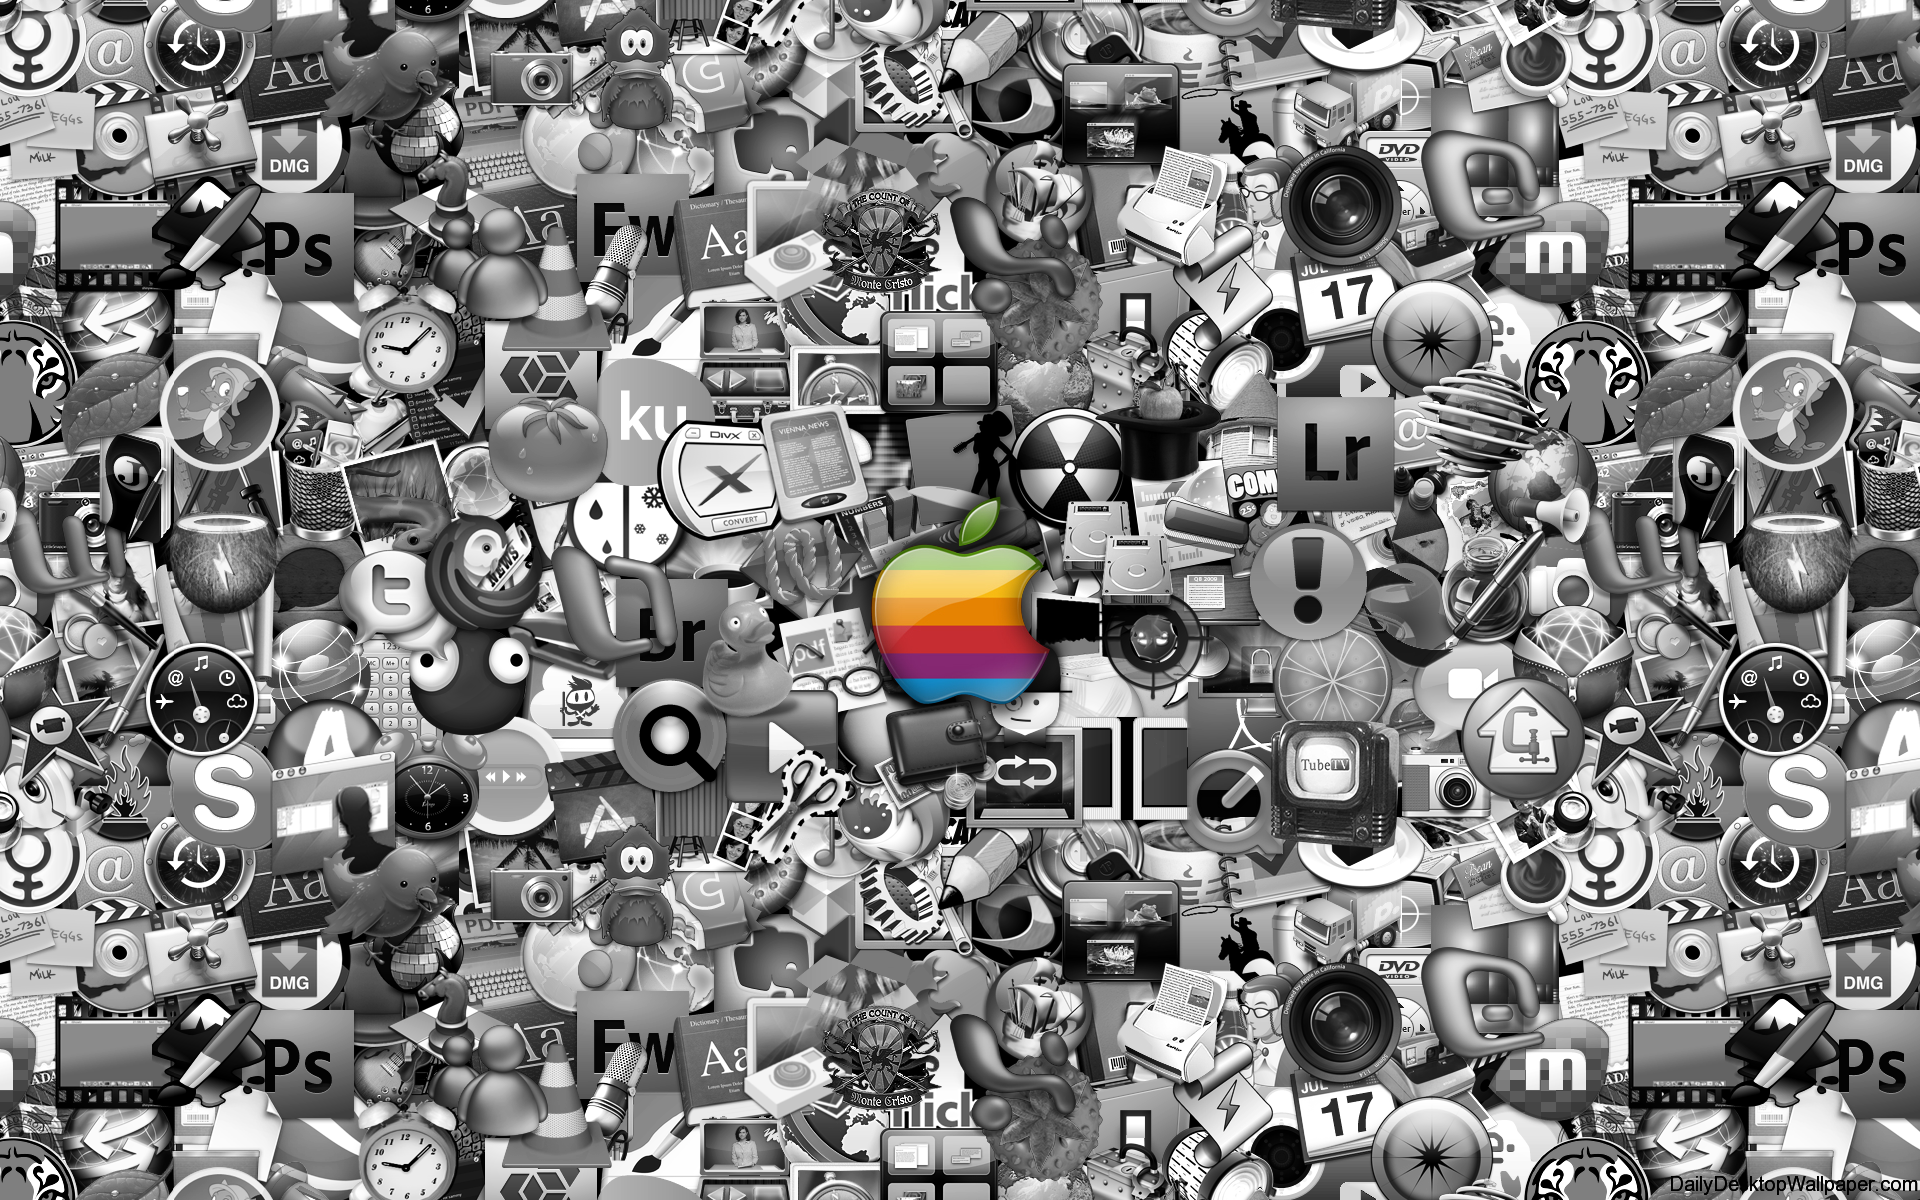 Apple and Logos - HD Backgrounds